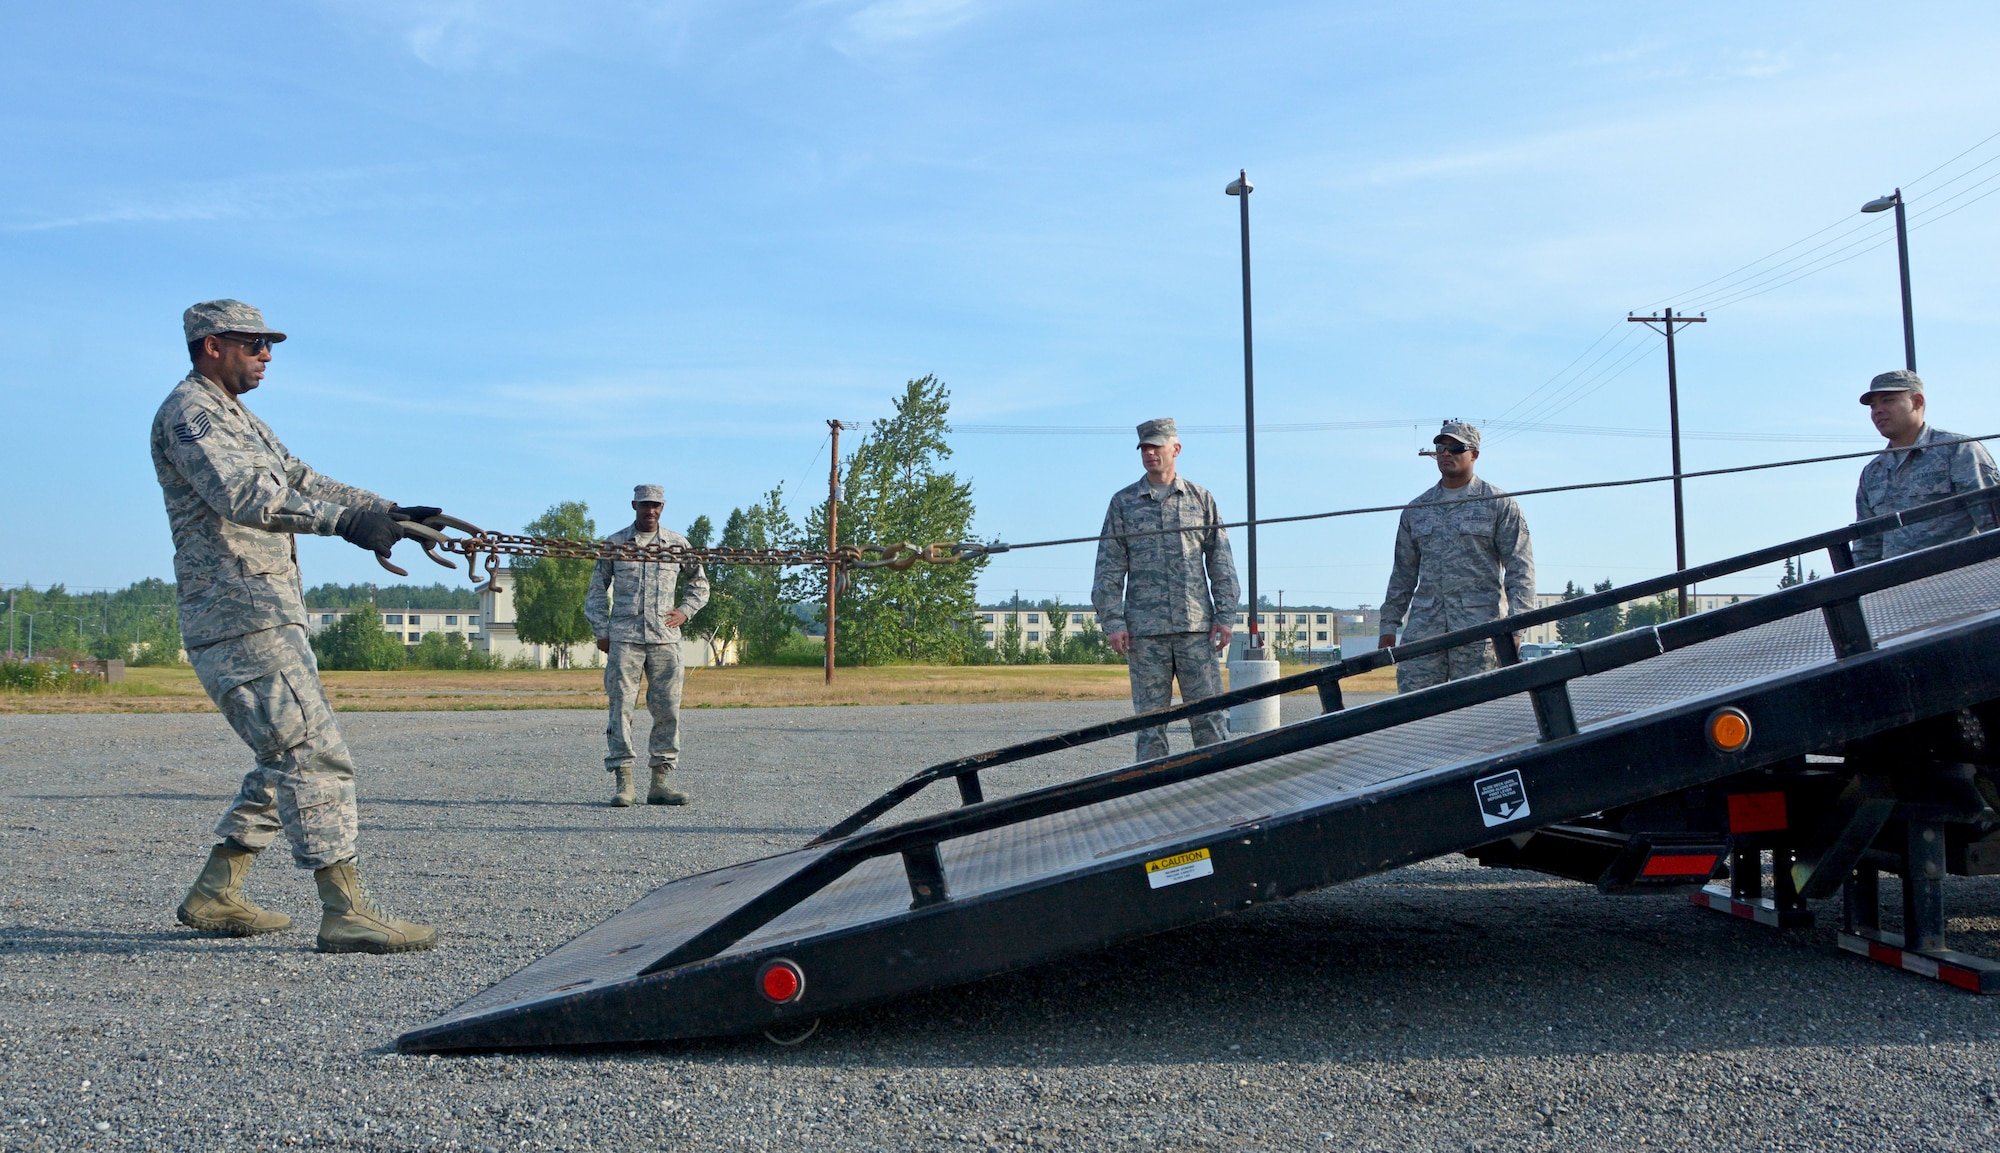 Tech. Sgt. Rahsaan Truett, 507th Logistics Readiness Squadron Ground Transportation Operations Center NCOIC, pulls out a tow chain on a rollback wrecker July 18, 2019, at Joint Base Elmendorf-Richardson, Alaska. (U.S. Air Force photo by Tech. Sgt. Samantha Mathison)